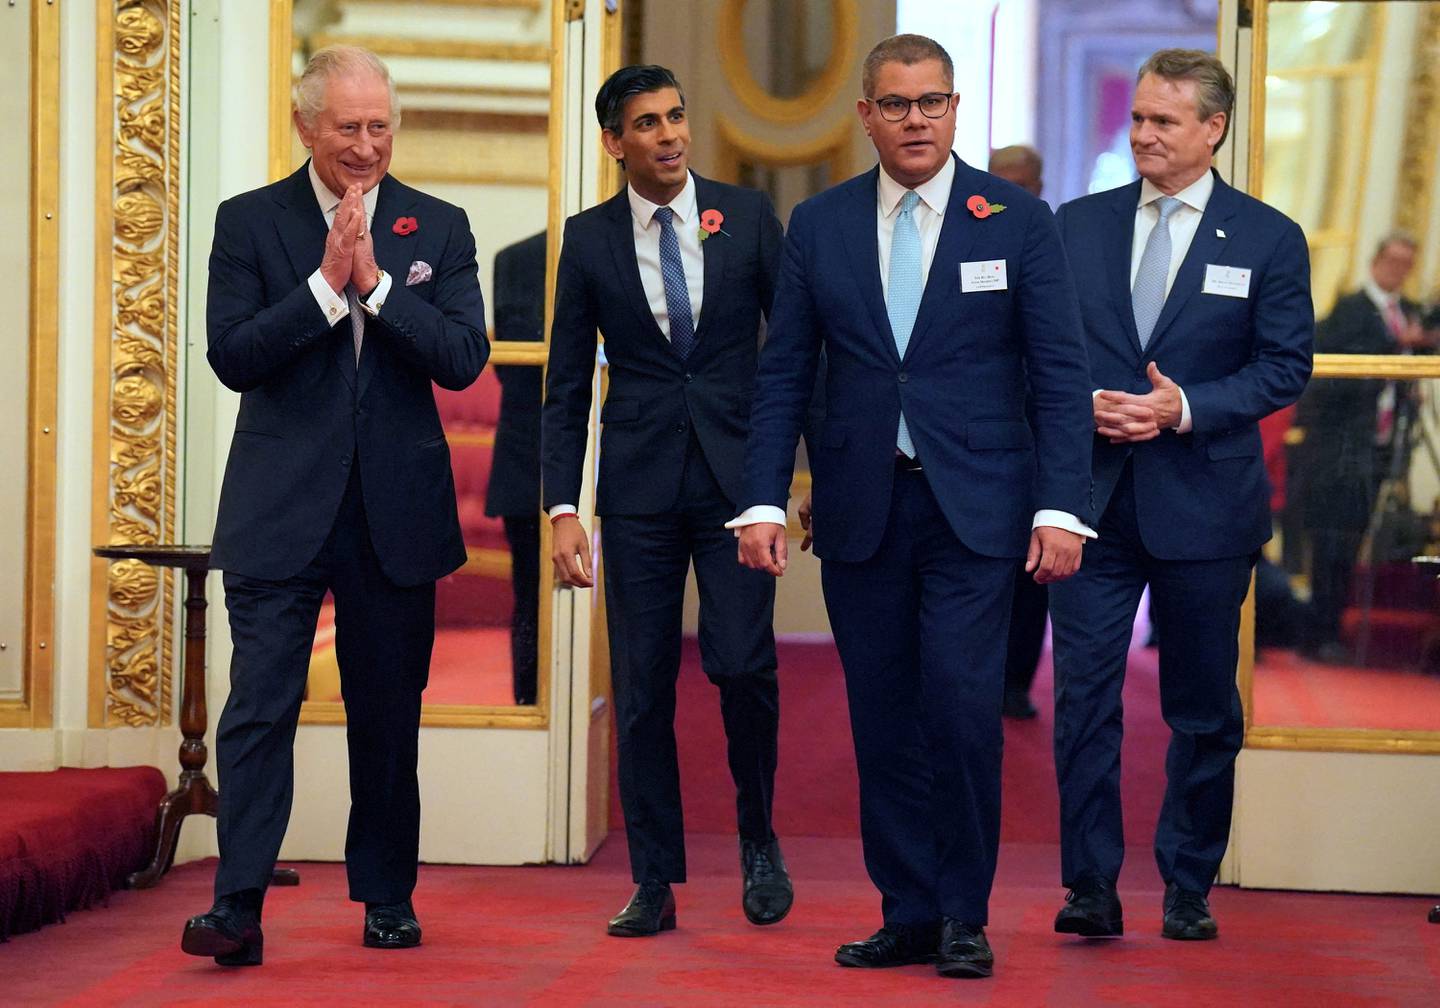 King Charles, Rishi Sunak, Alok Sharma and Brian Moynihan at a reception for world leaders, business figures, environmentalists and NGOs at Buckingham Palace. Getty Images